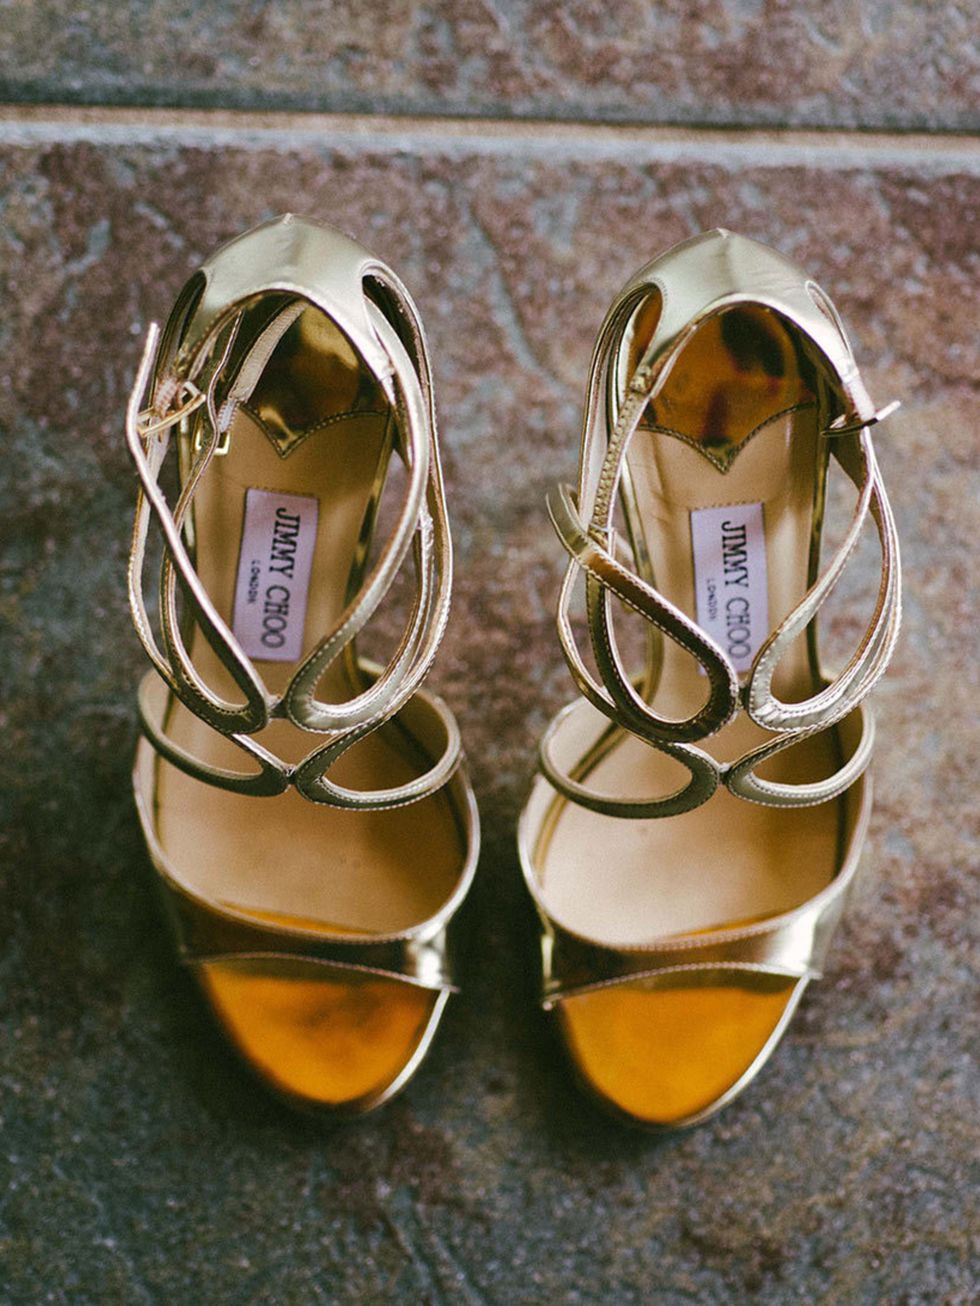 <p>My wedding shoes were Jimmy Choo: a gift from my 94-year-old great granddad. </p>